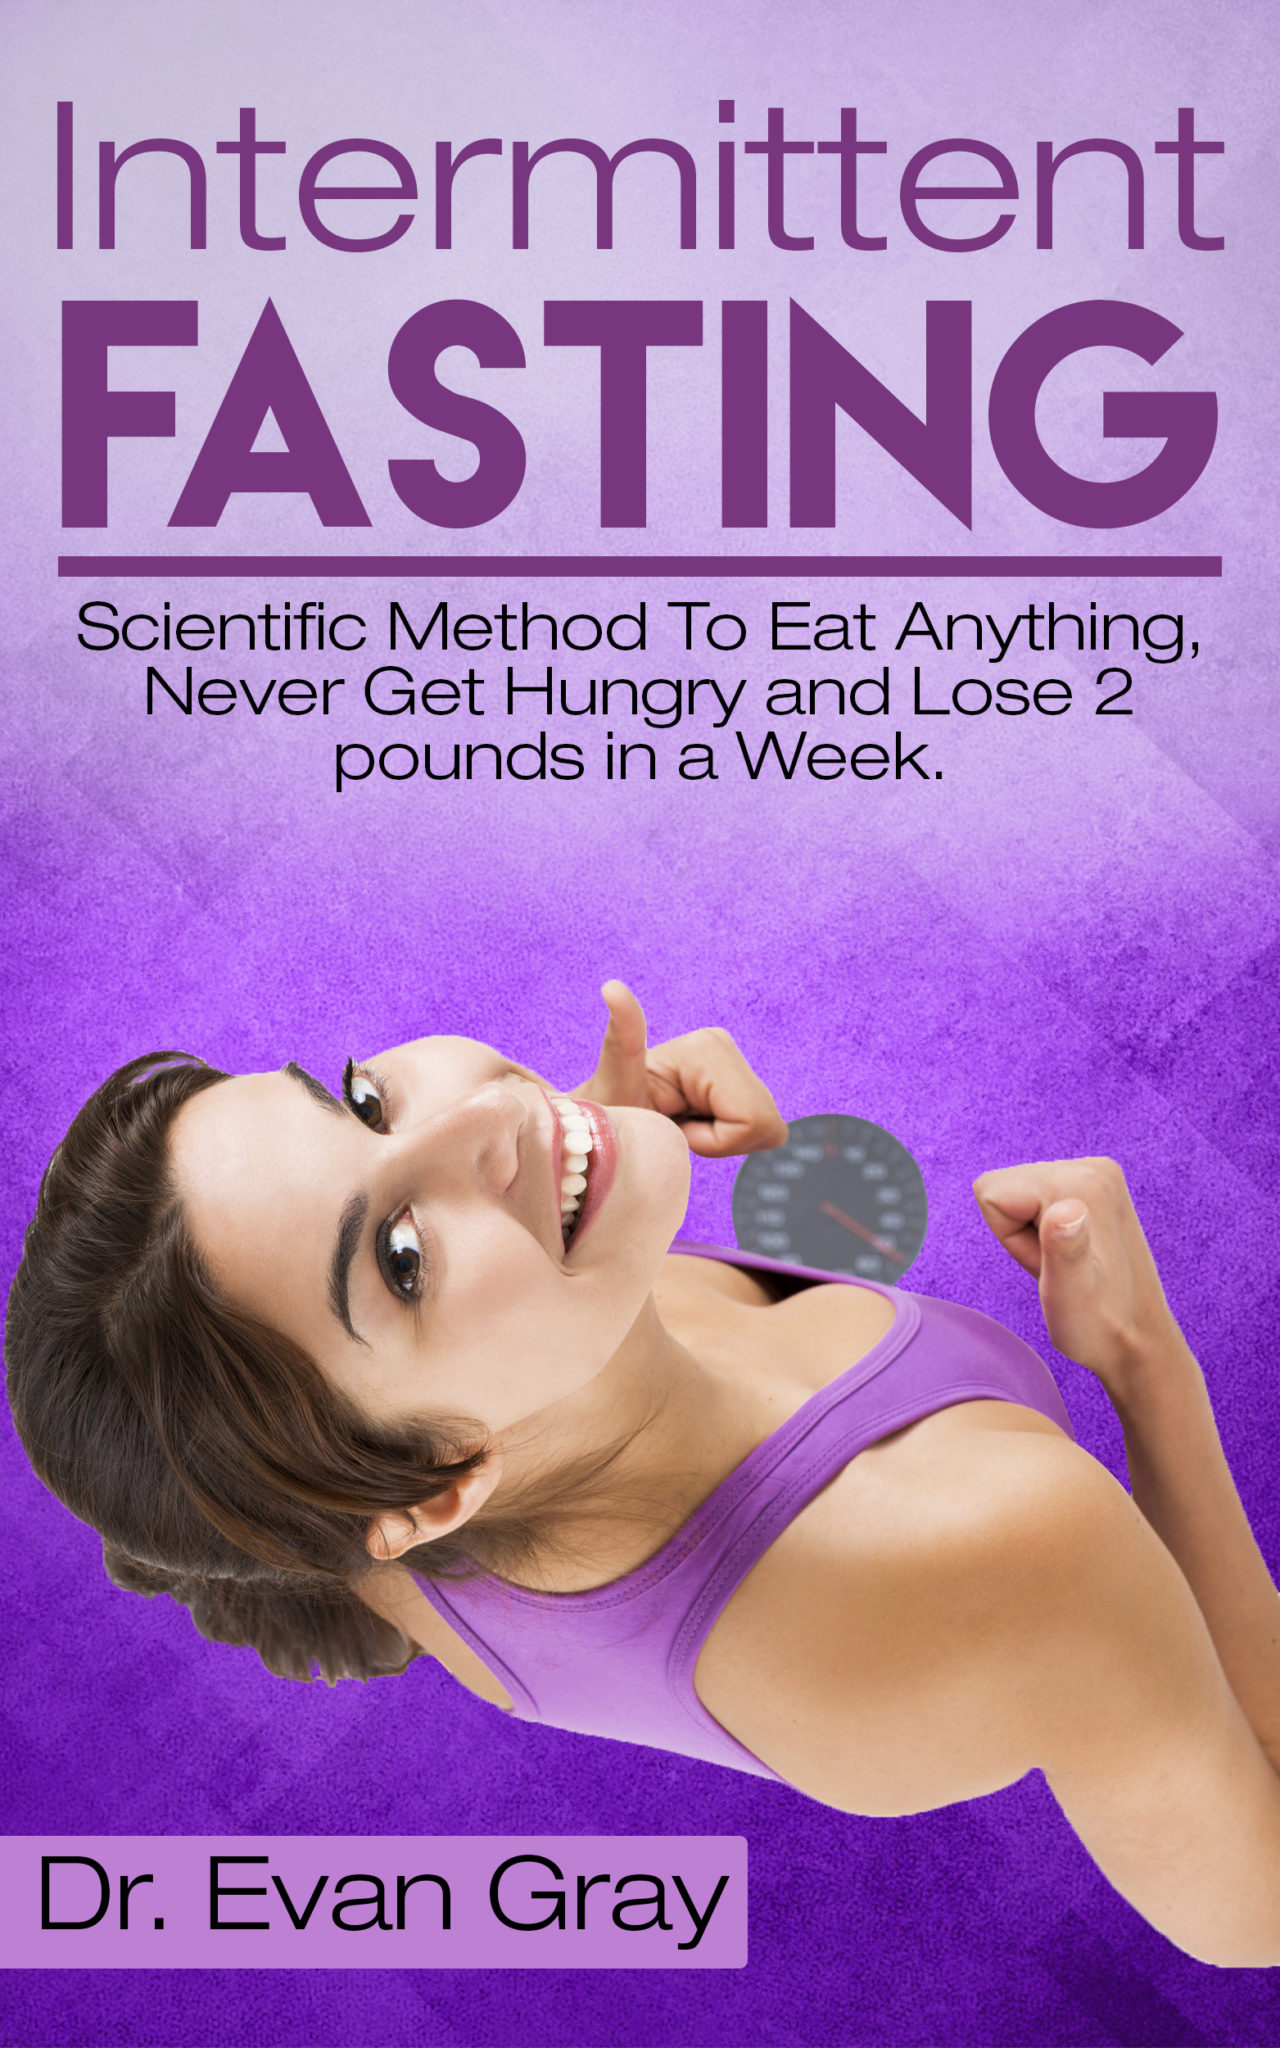 FREE: Intermittent Fasting : Scientific Method To Eat Anything, Never Get Hungry and Lose 2 Pounds In A Week. by Dr Evan Gray